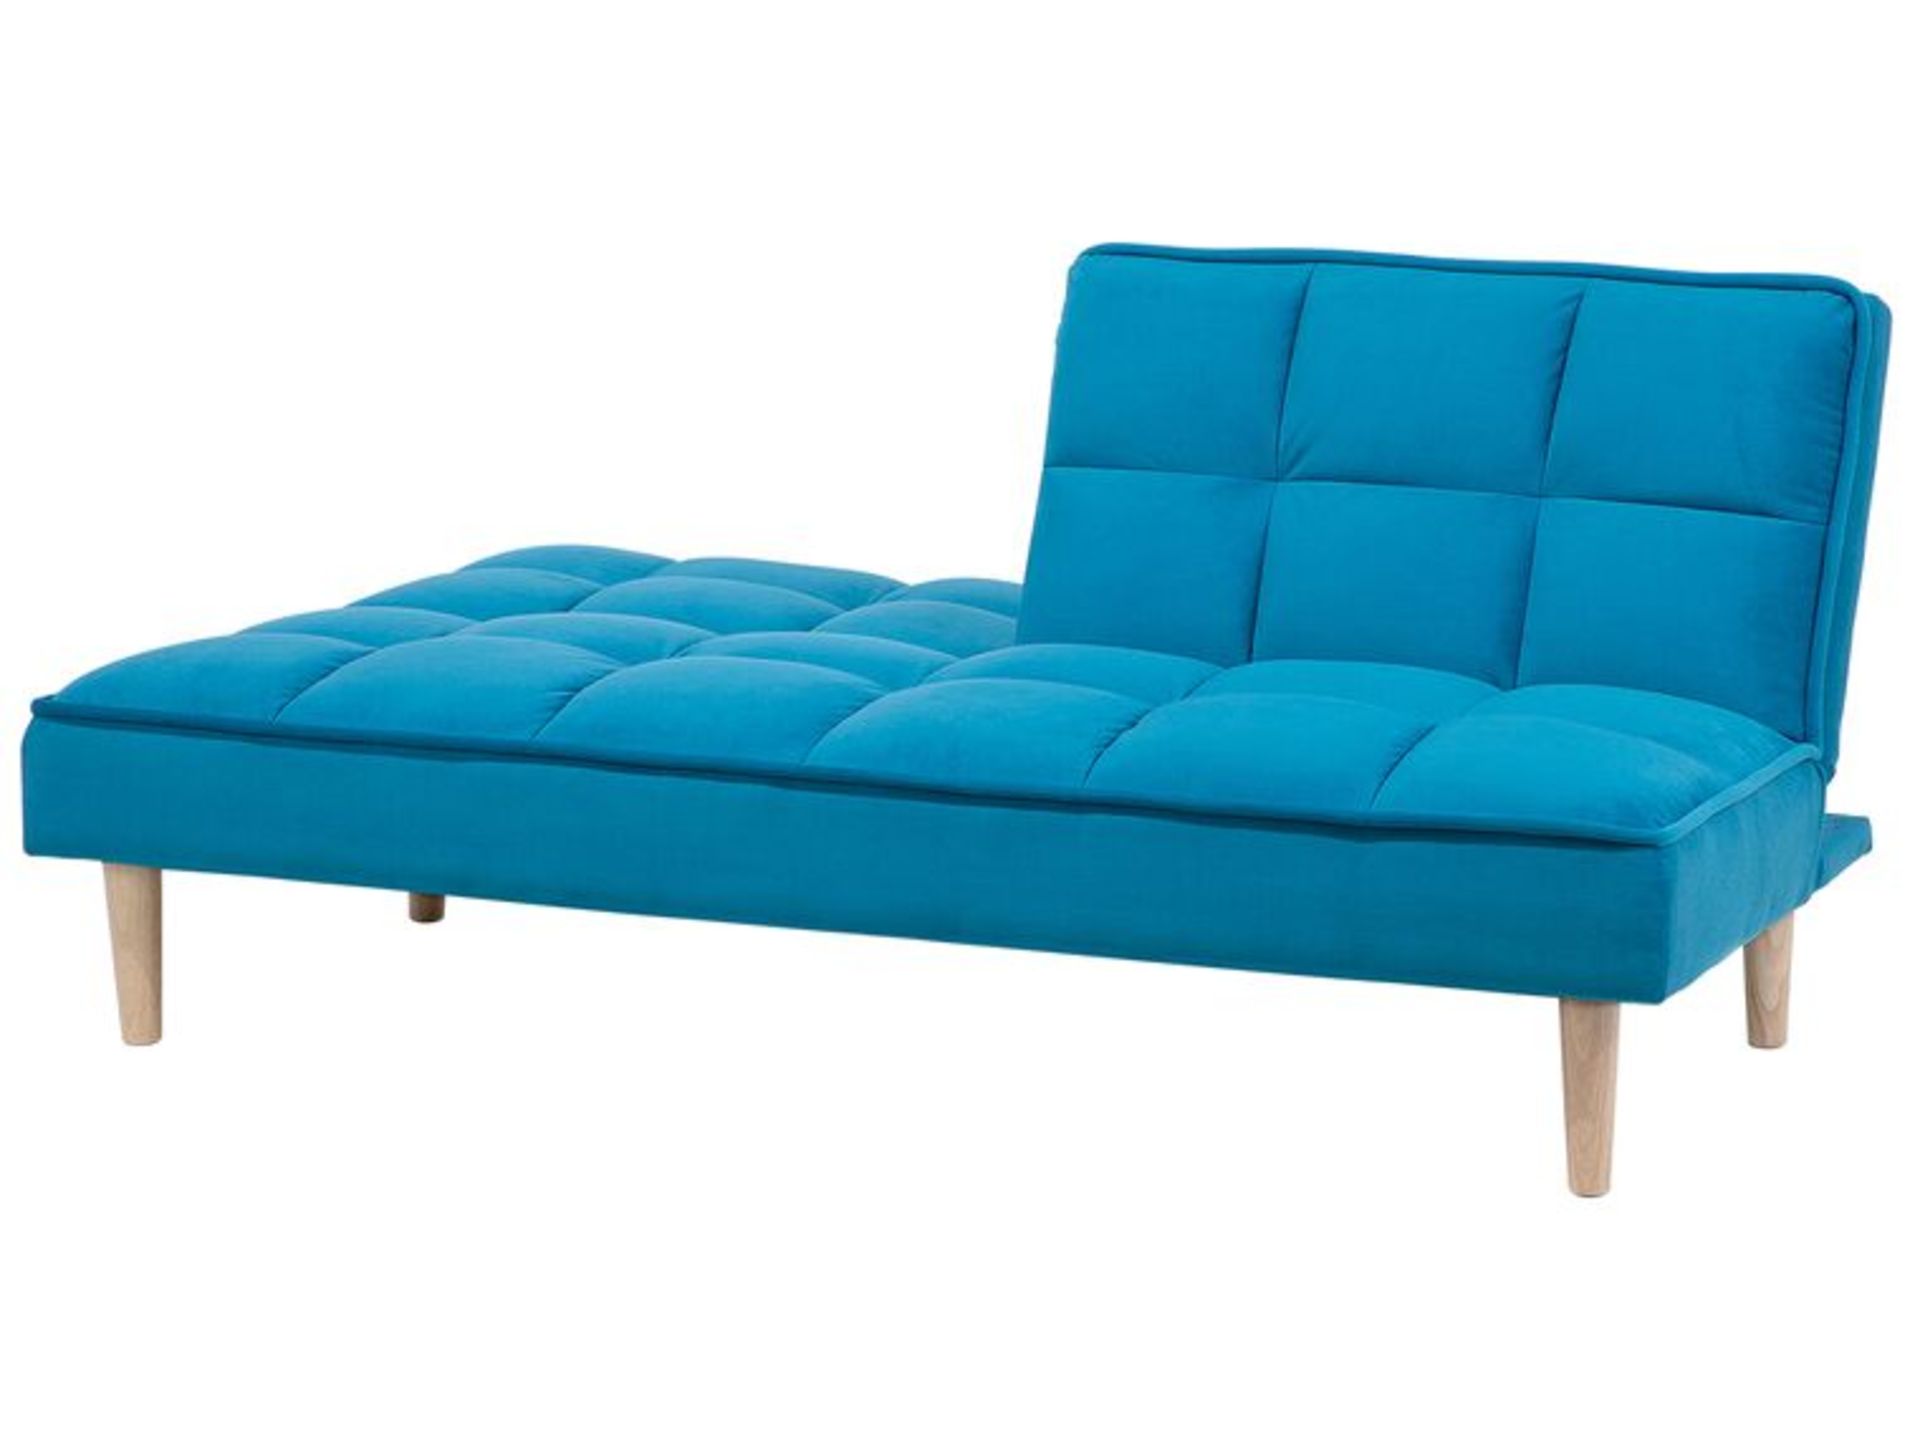 Siljan Fabric Sofa Bed Blue. - ER. Simple, clean style combined with functionality, this 3-seater - Bild 2 aus 2